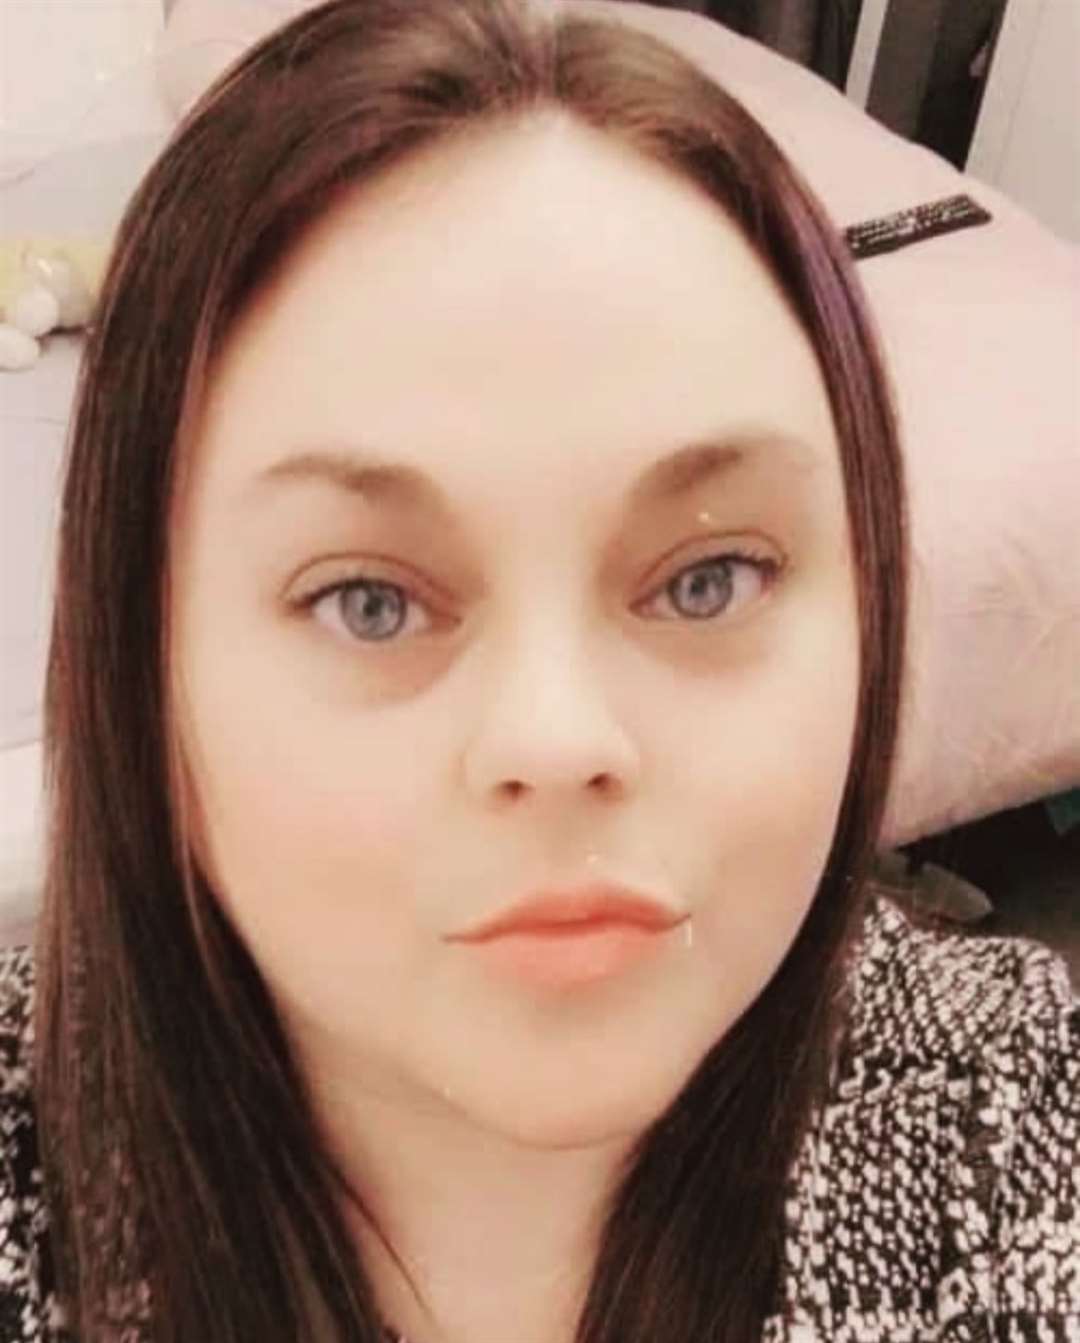 Sarah Tansley, a clinical carer at Pembury hospital, died in December 2021. Picture: Instagram